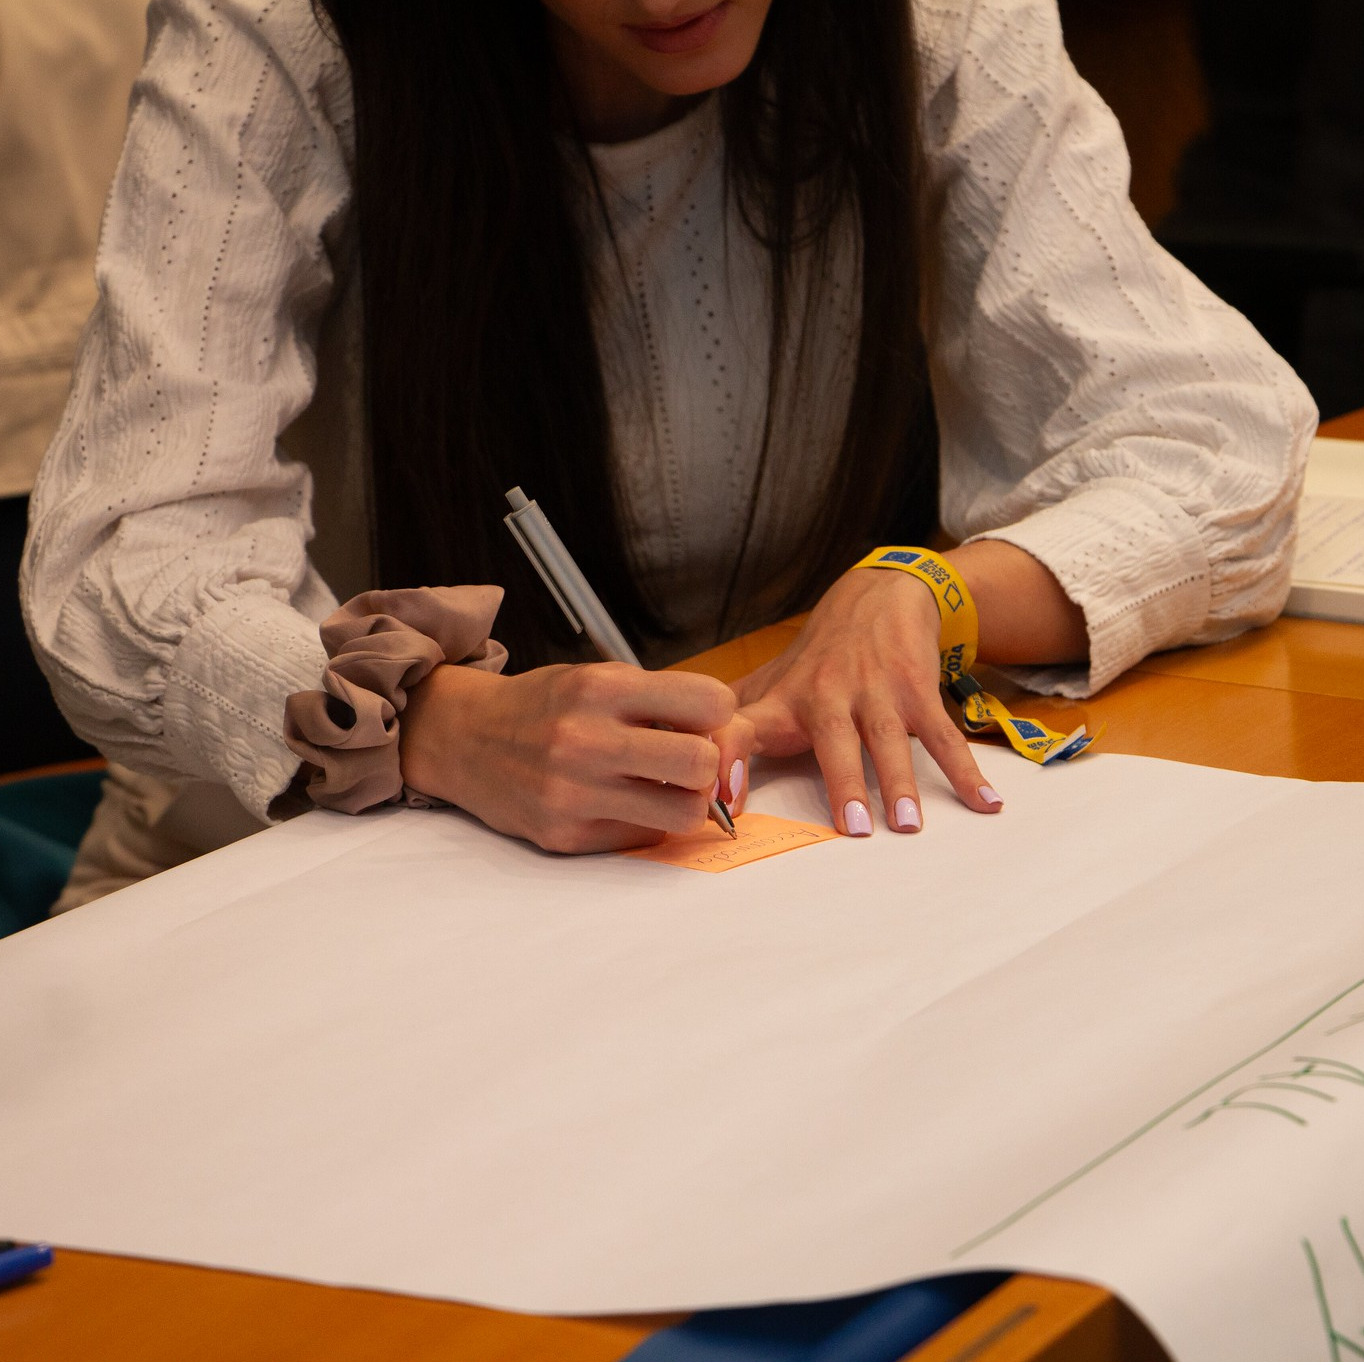 Image of a person writing on a flipchart at a desk.